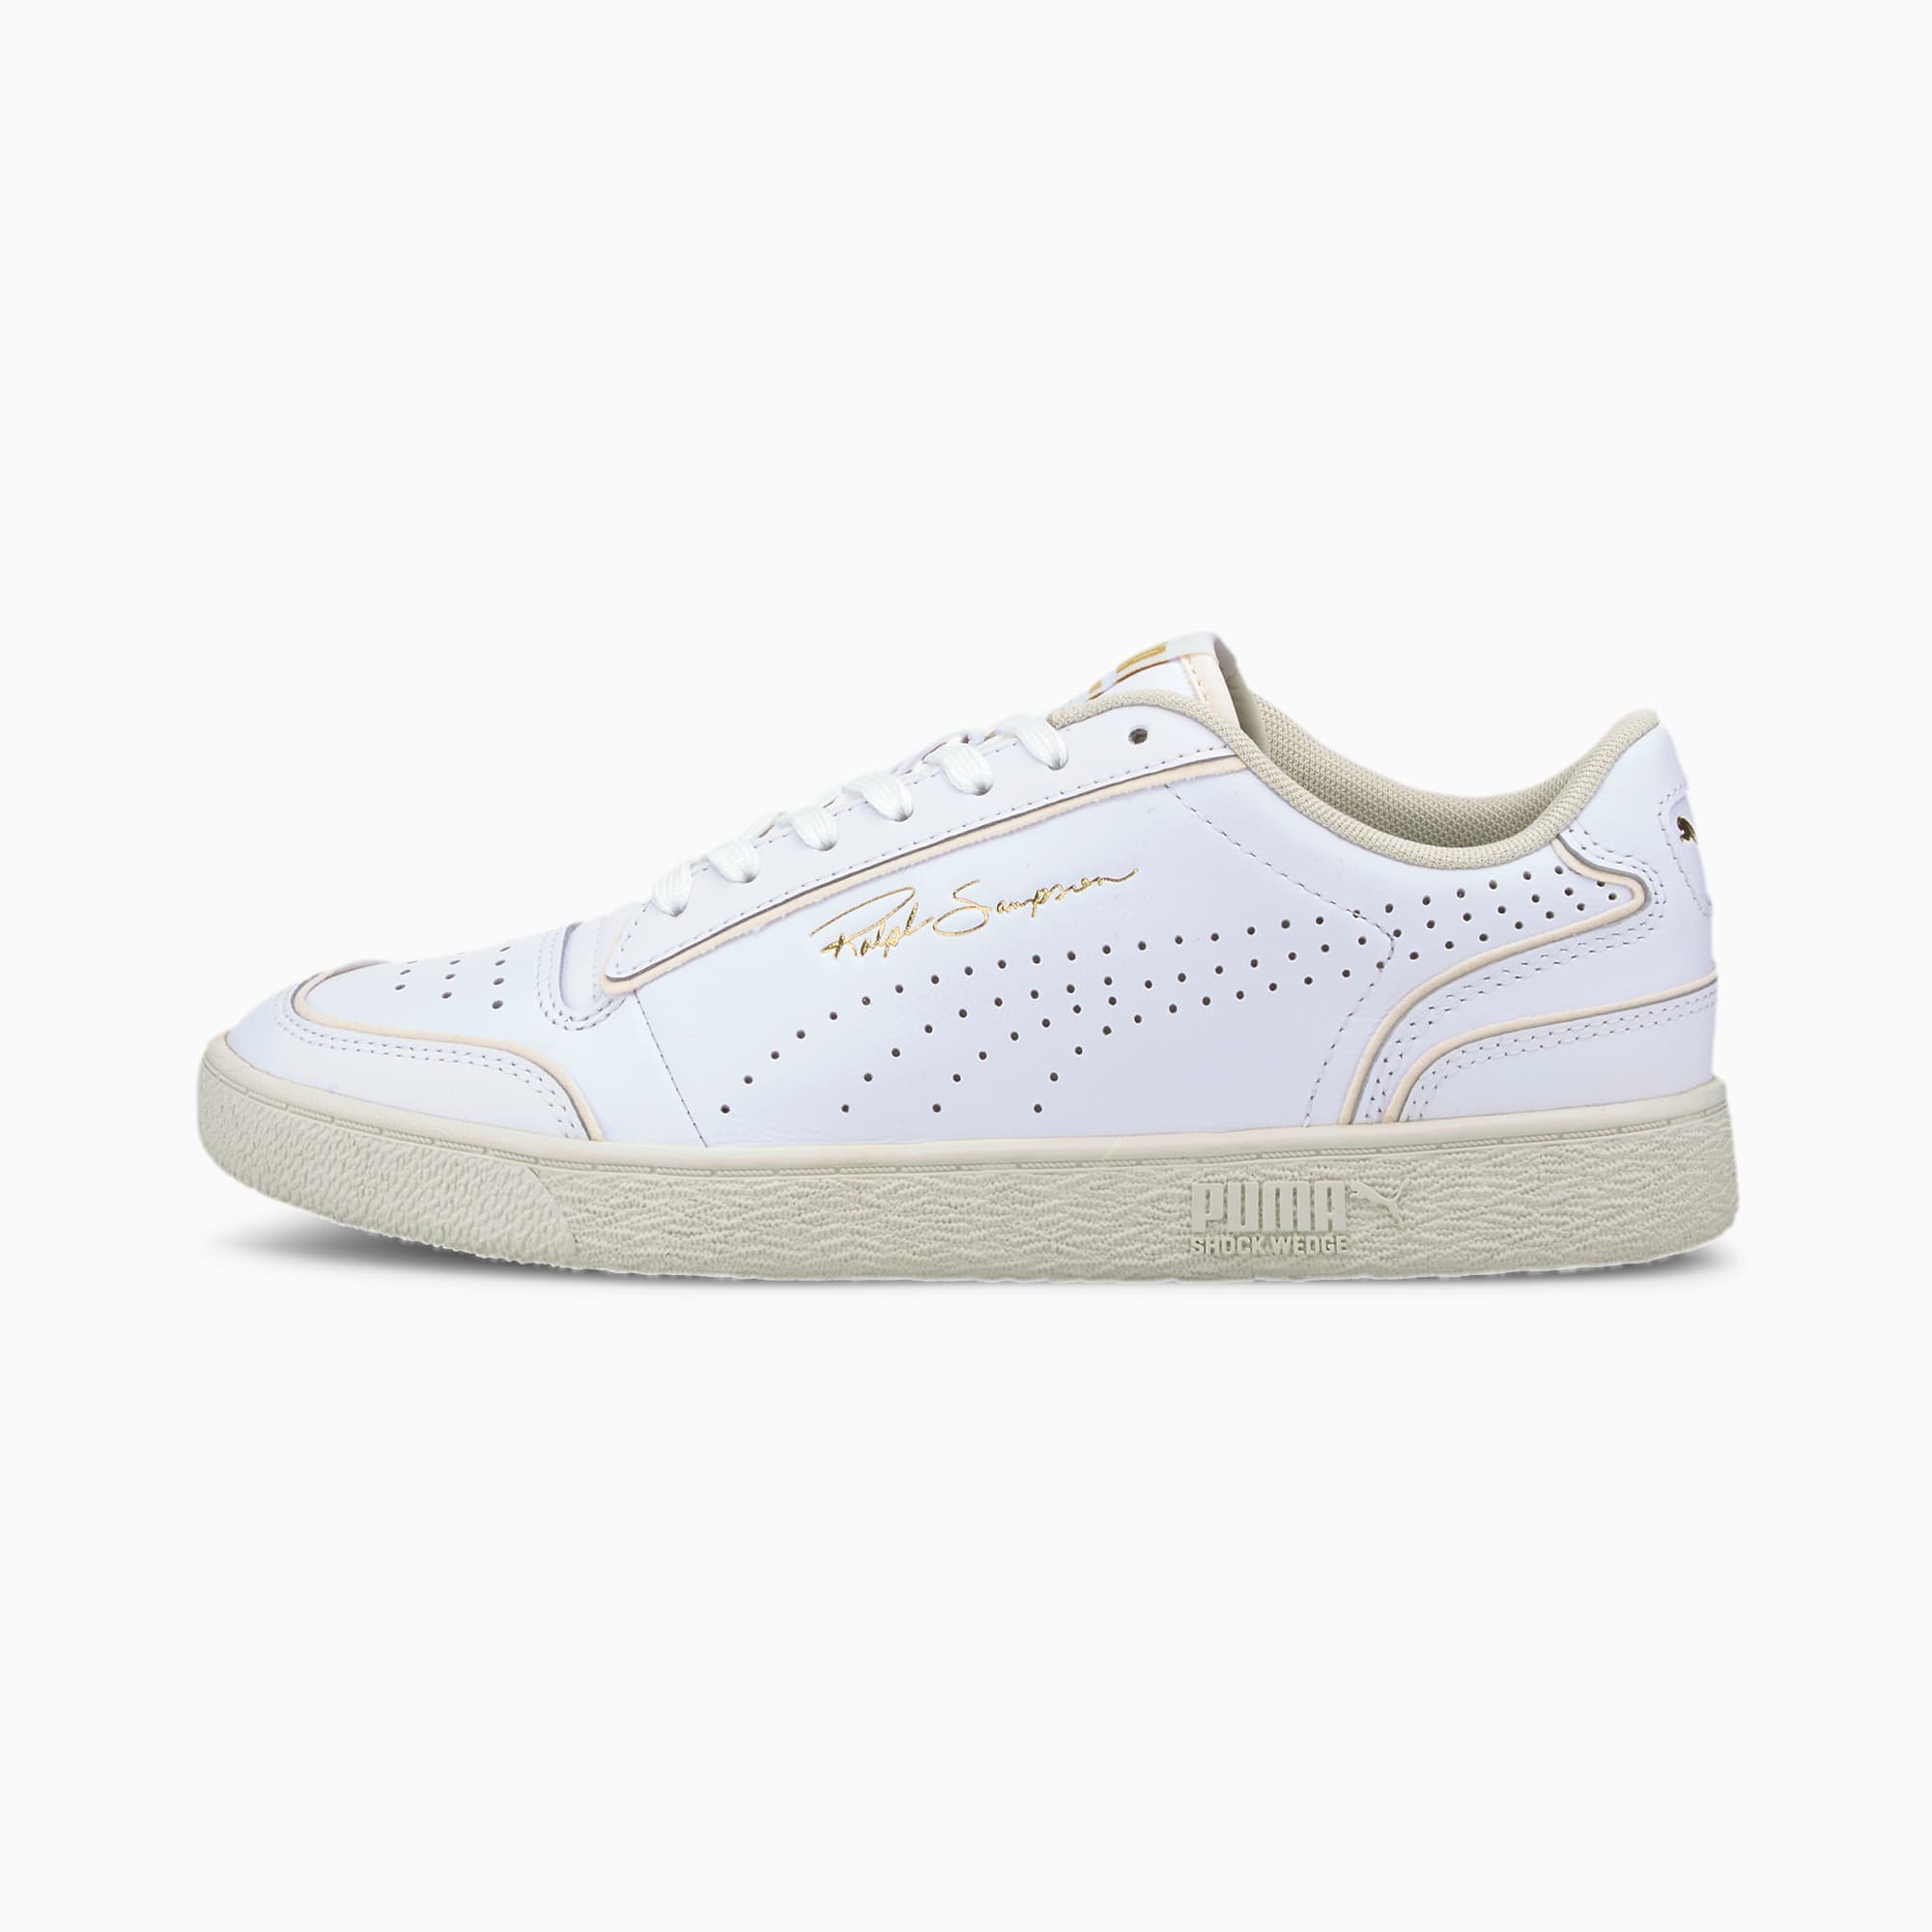 PUMA Chaussure Basket Ralph Sampson Lo Perforated Outline, Blanc, Taille 36, Chaussures